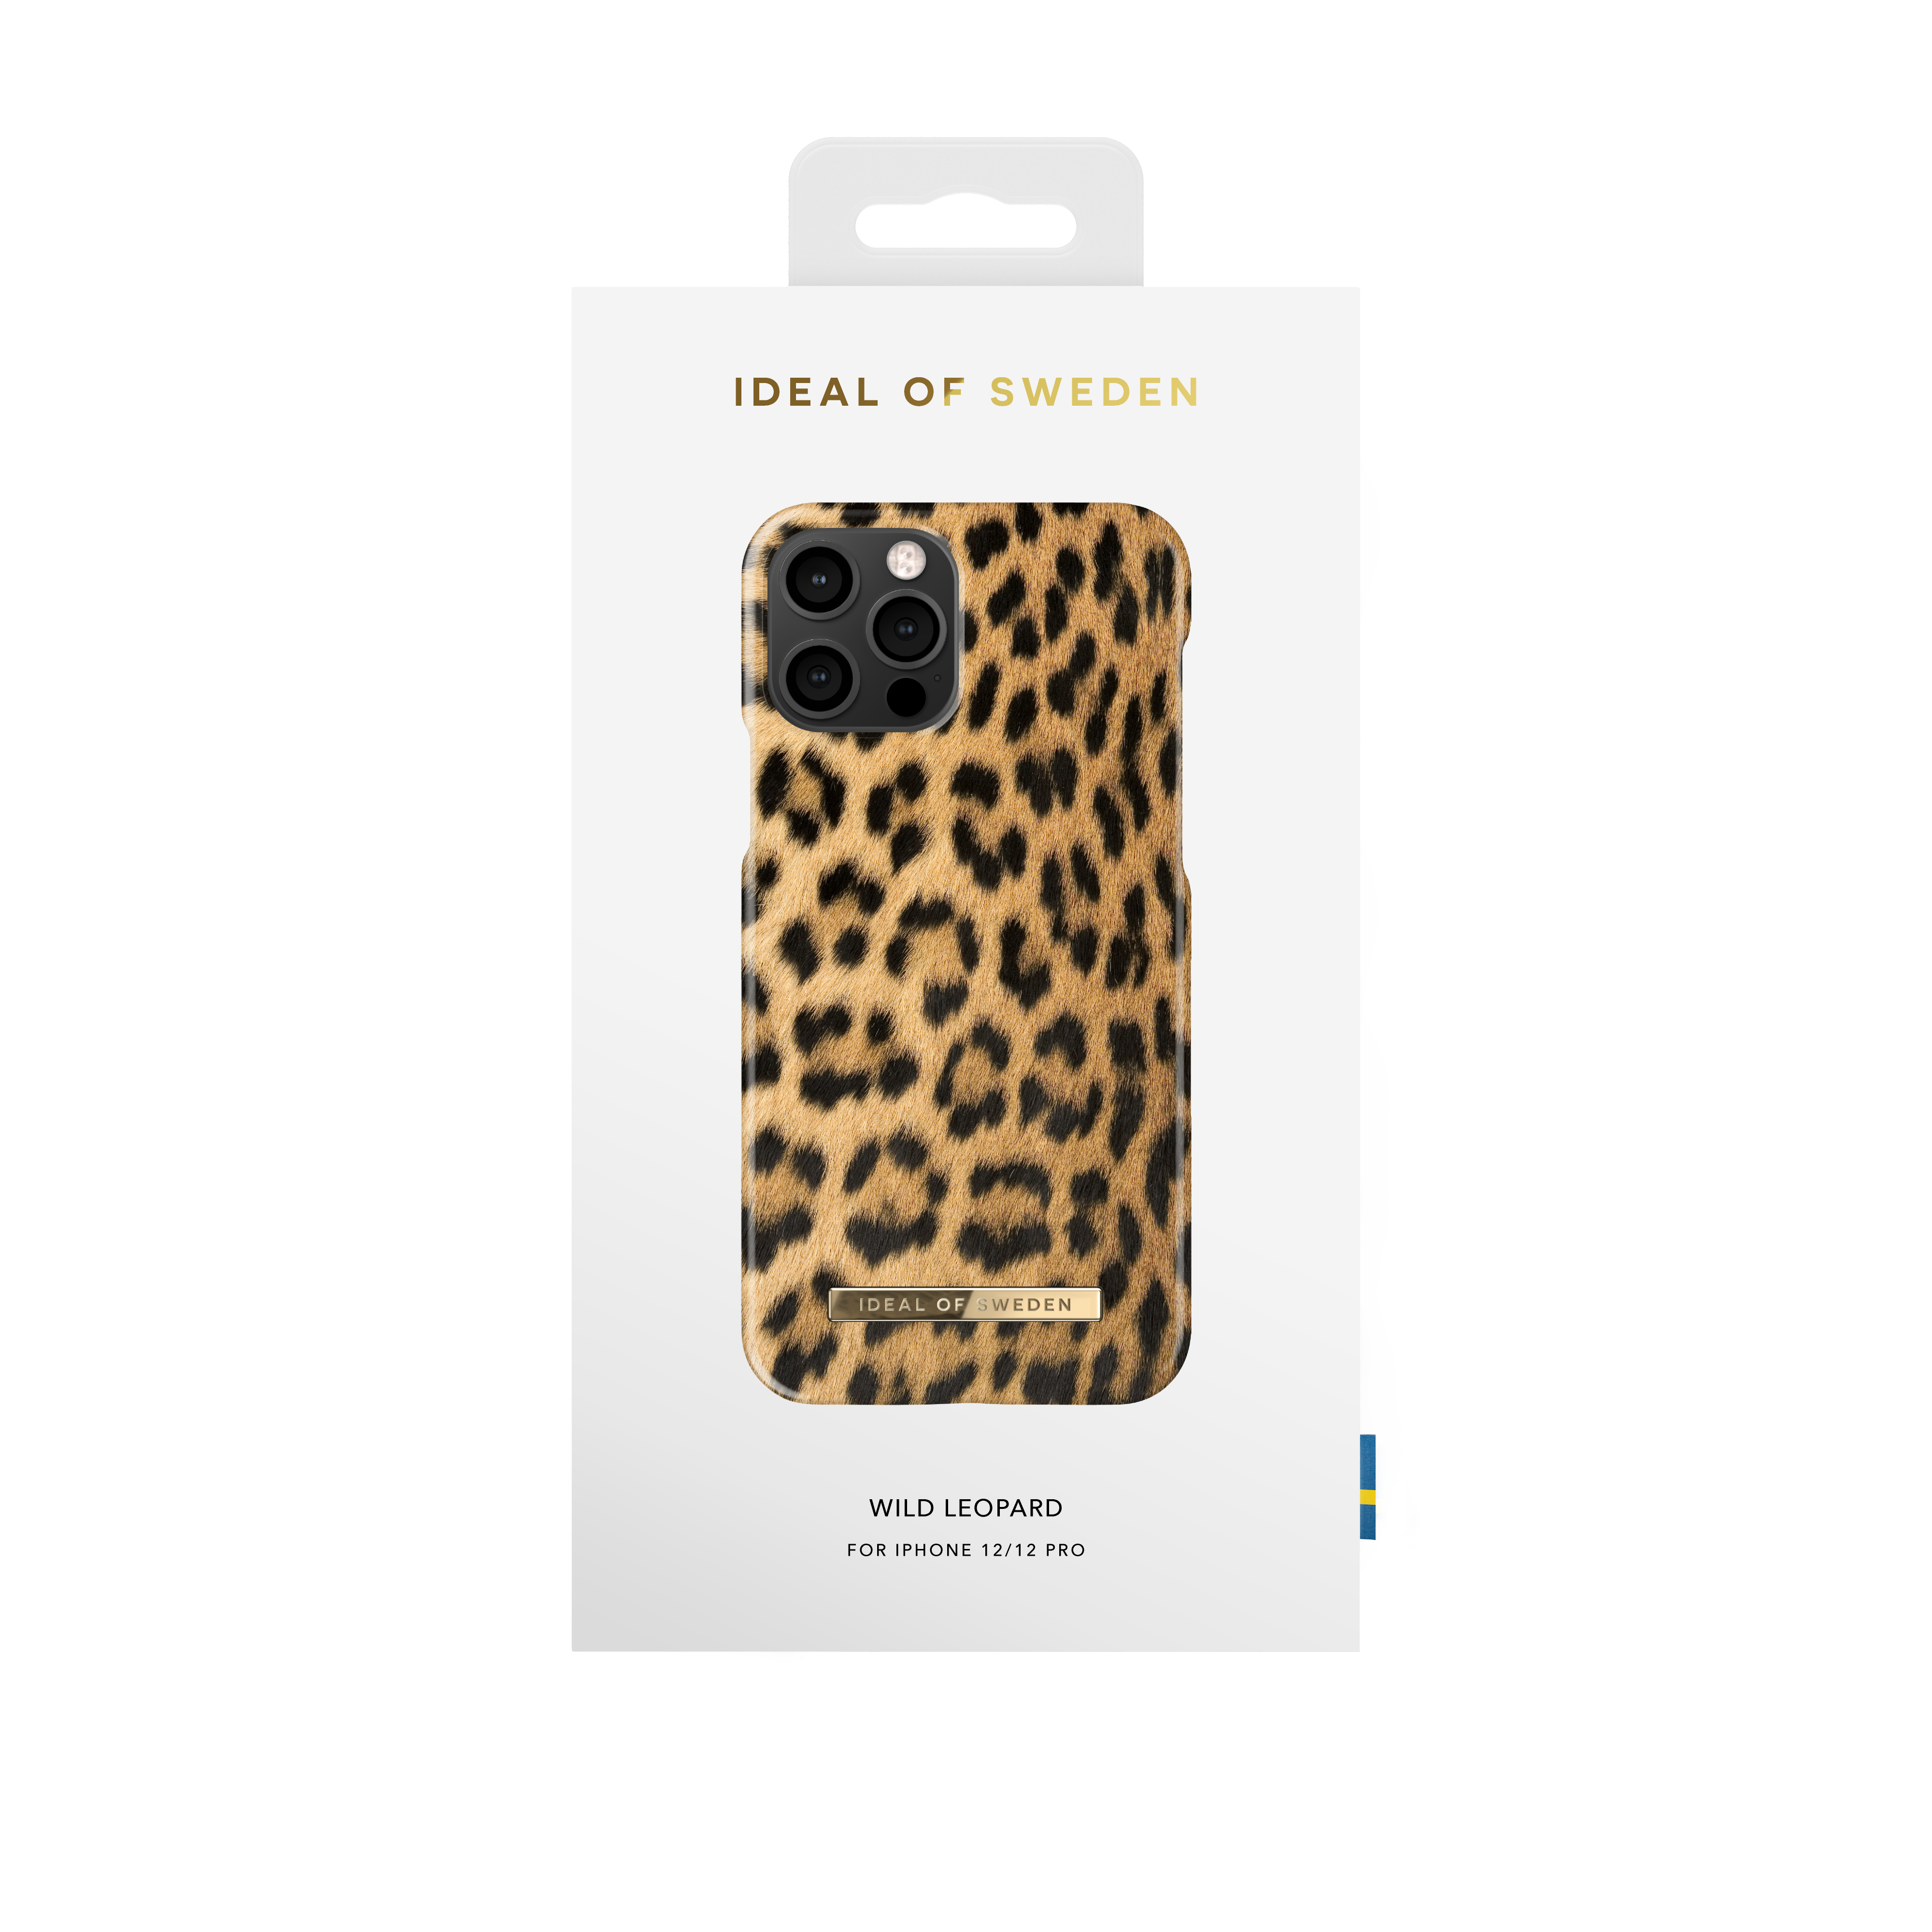 iPhone Pro, Wild Backcover, 12, SWEDEN IDEAL IDFCS17-I2061-67, iPhone Apple, OF Leopard 12